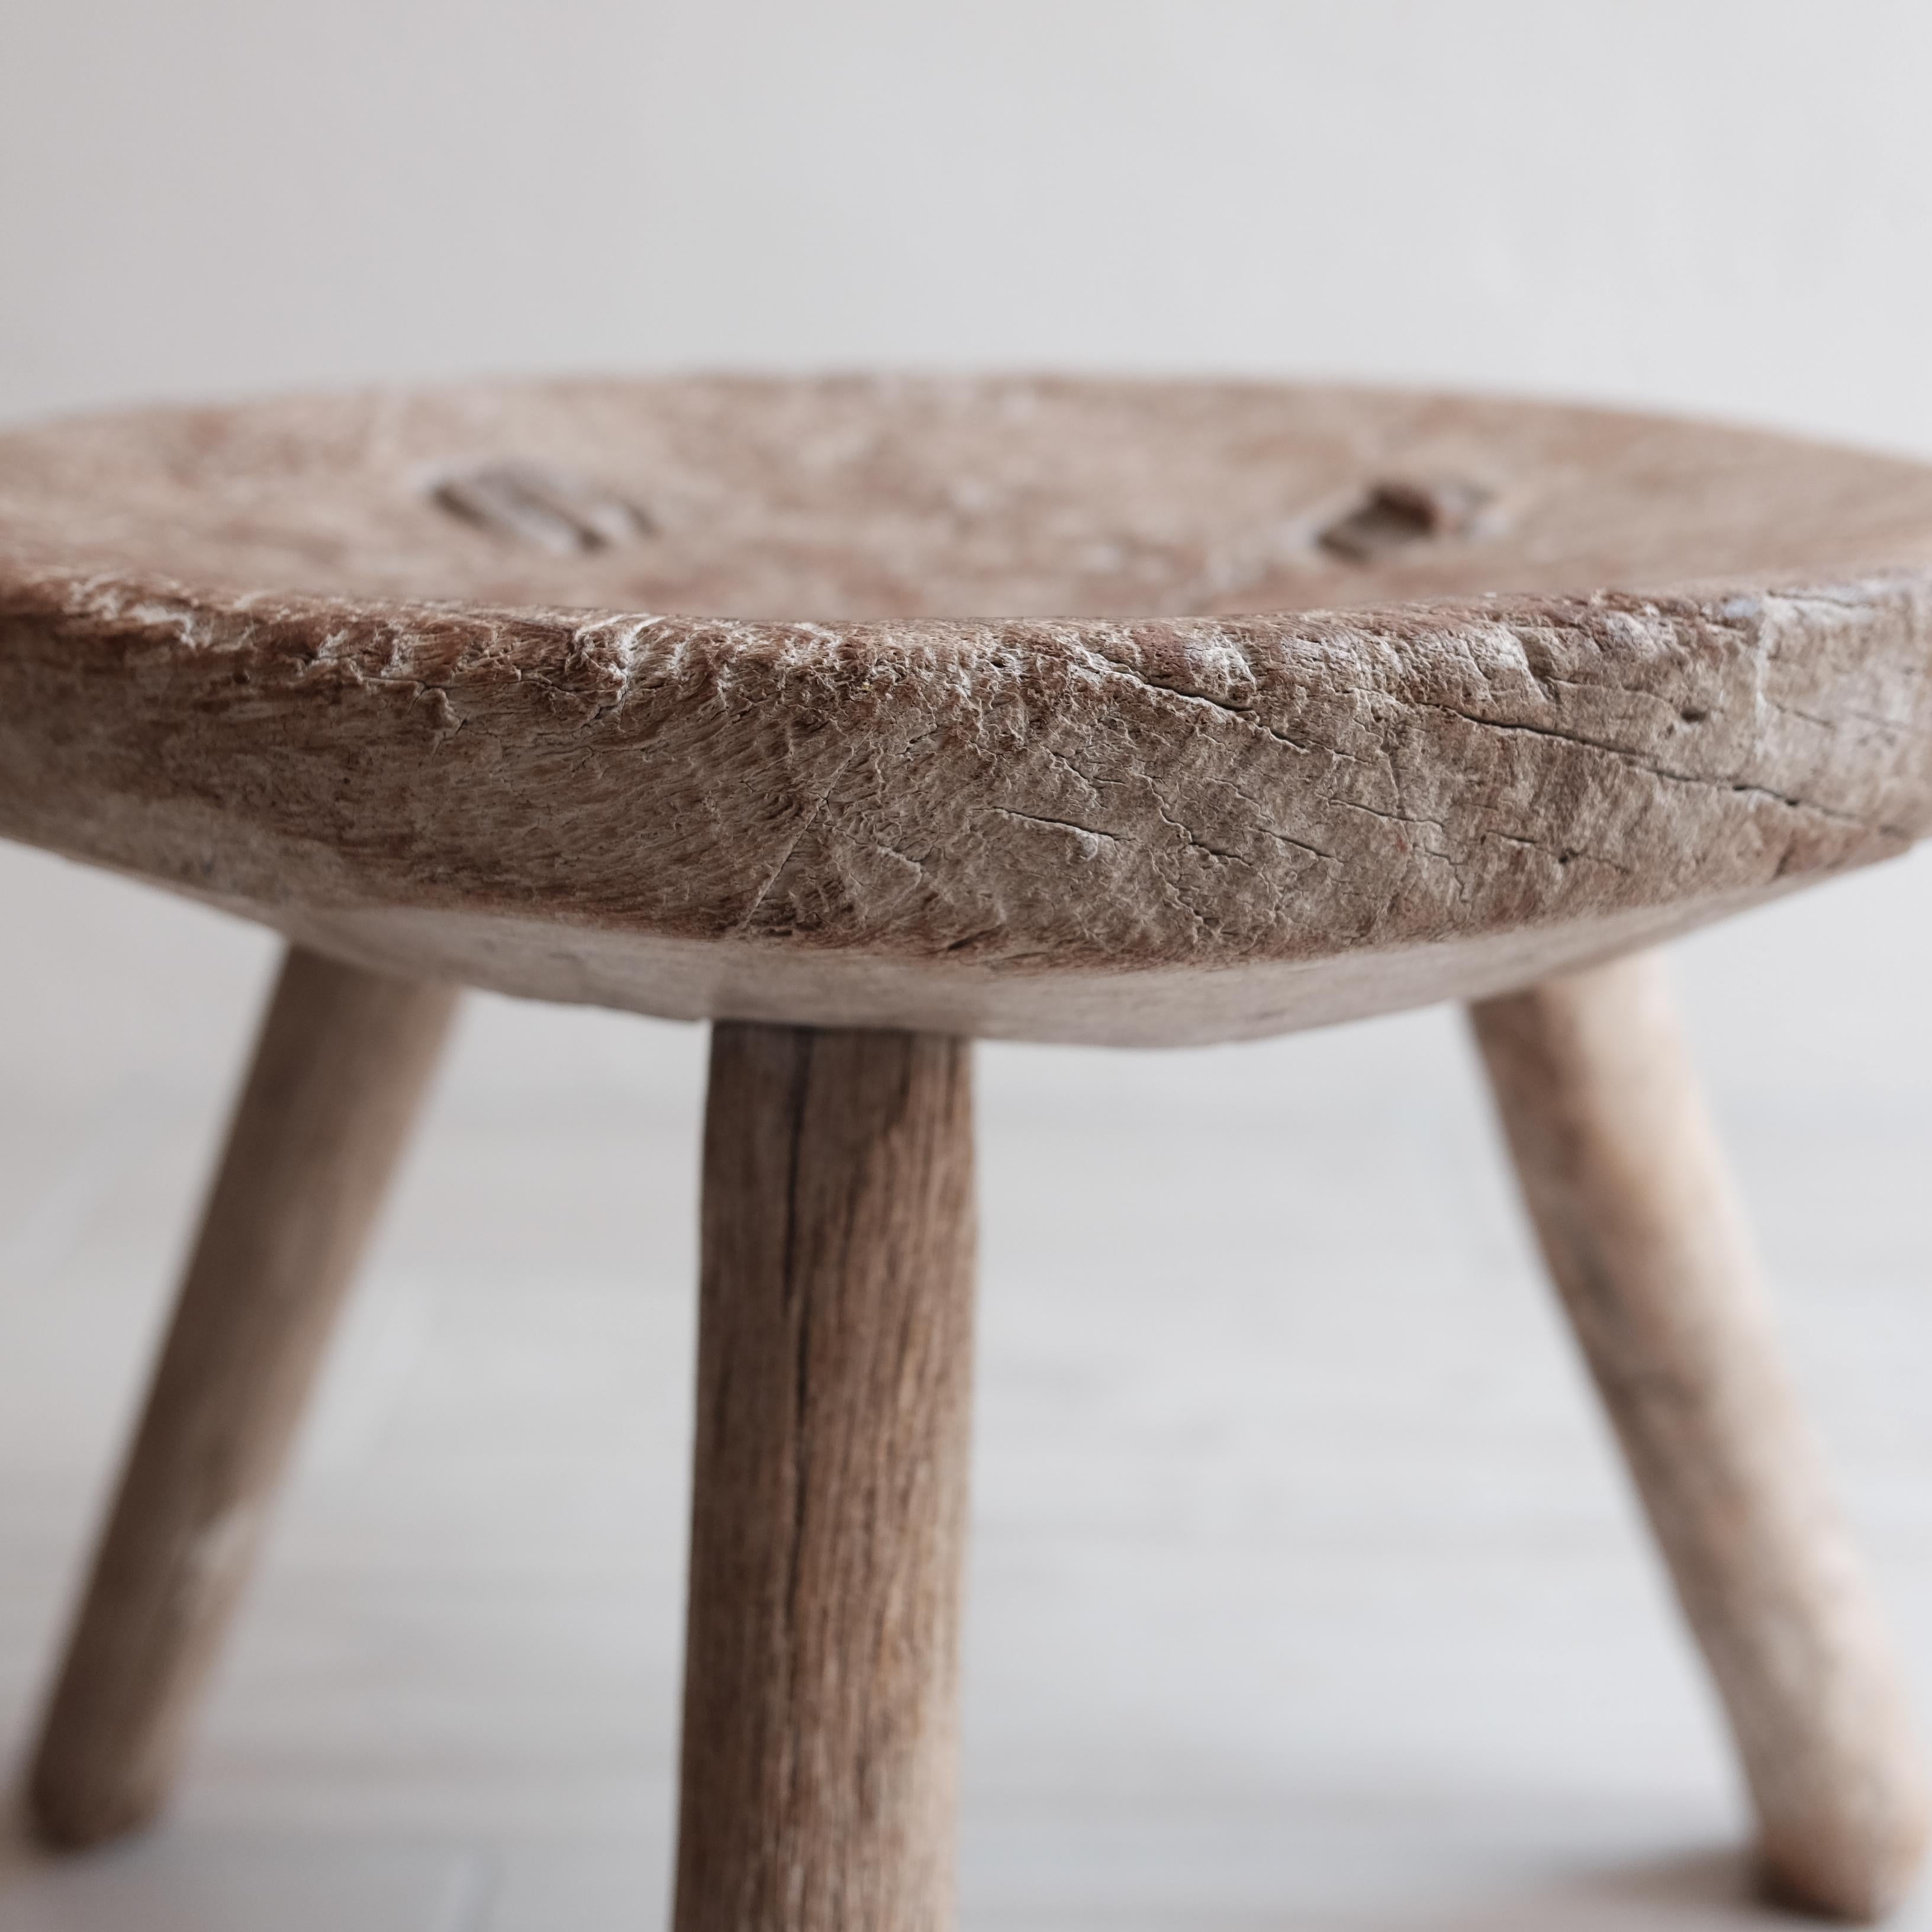 Mesquite stool from the Sierra Gorda mountain range, circa 1960s. Obtained from a private collection in San Miguel de Allende.